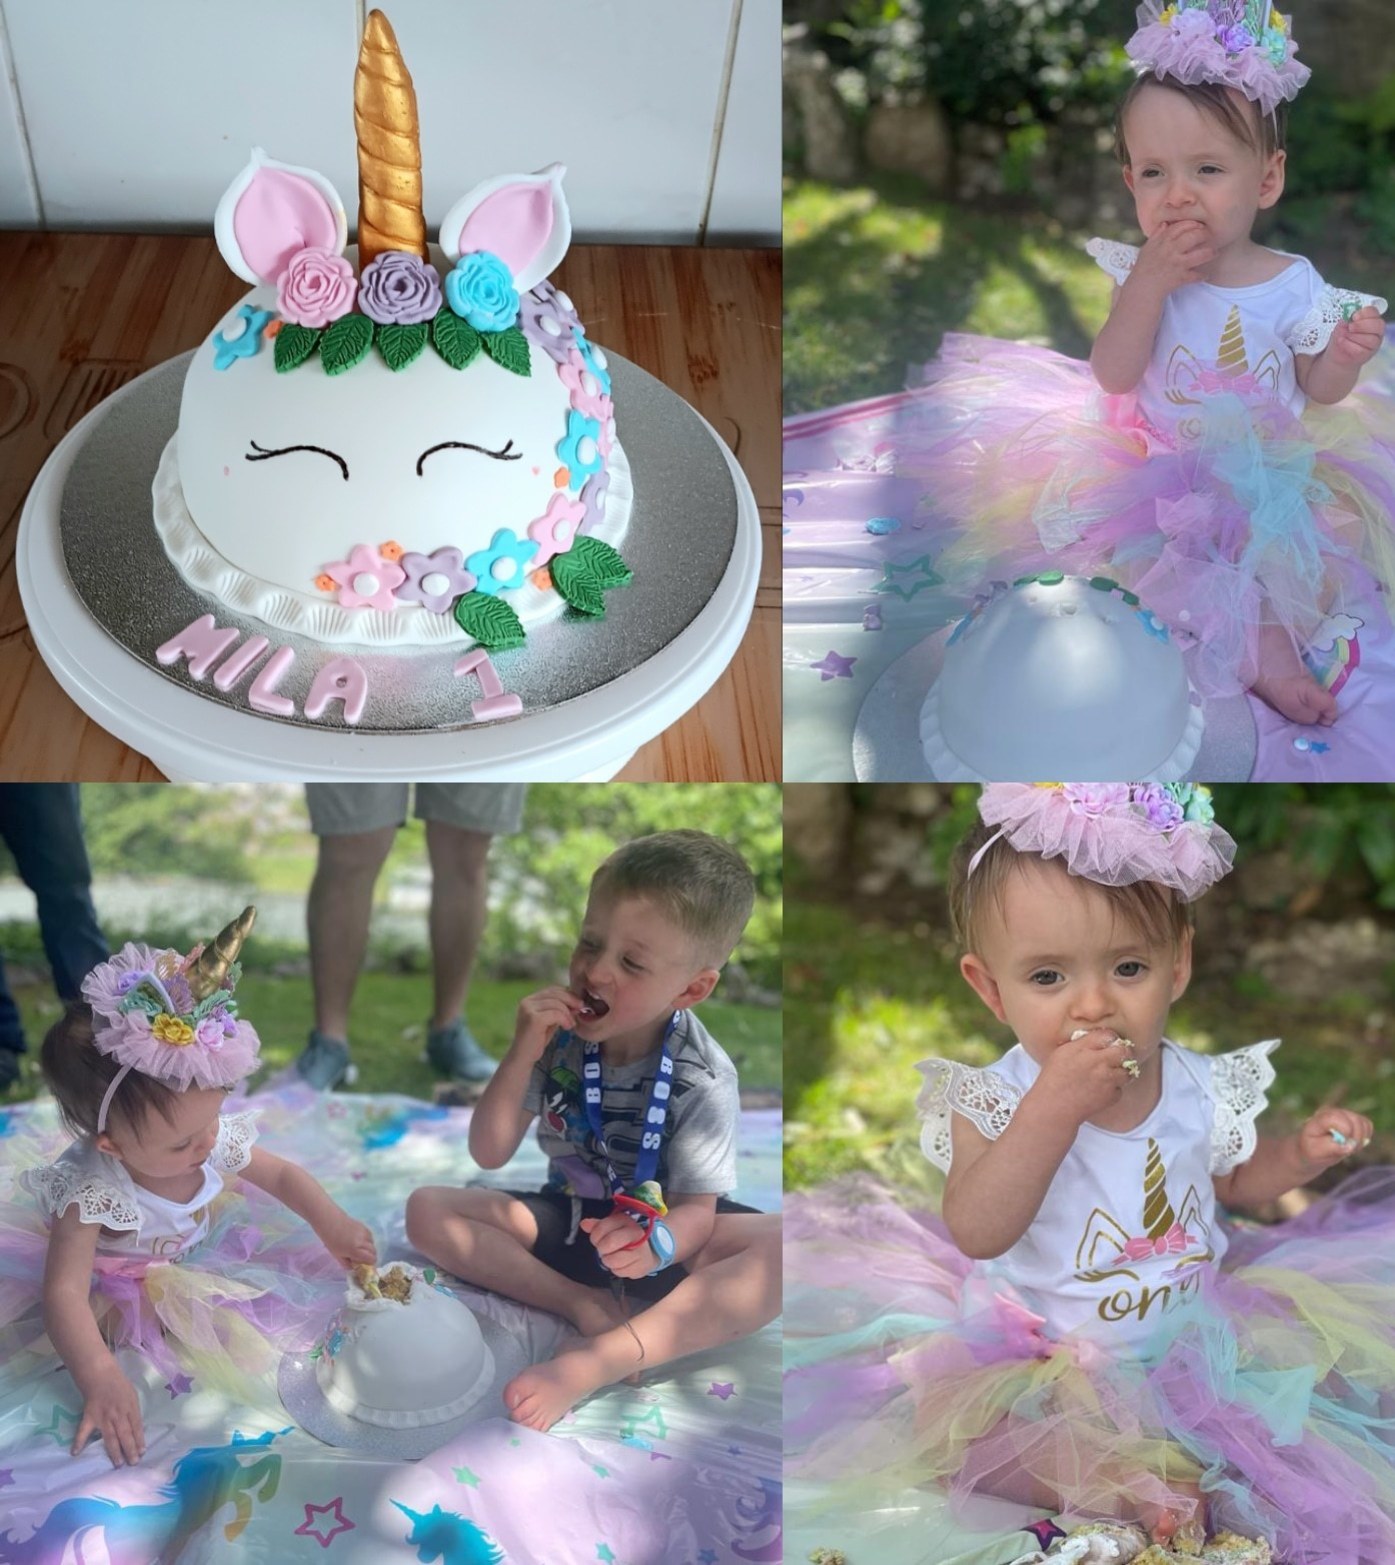 Smash cake pictures